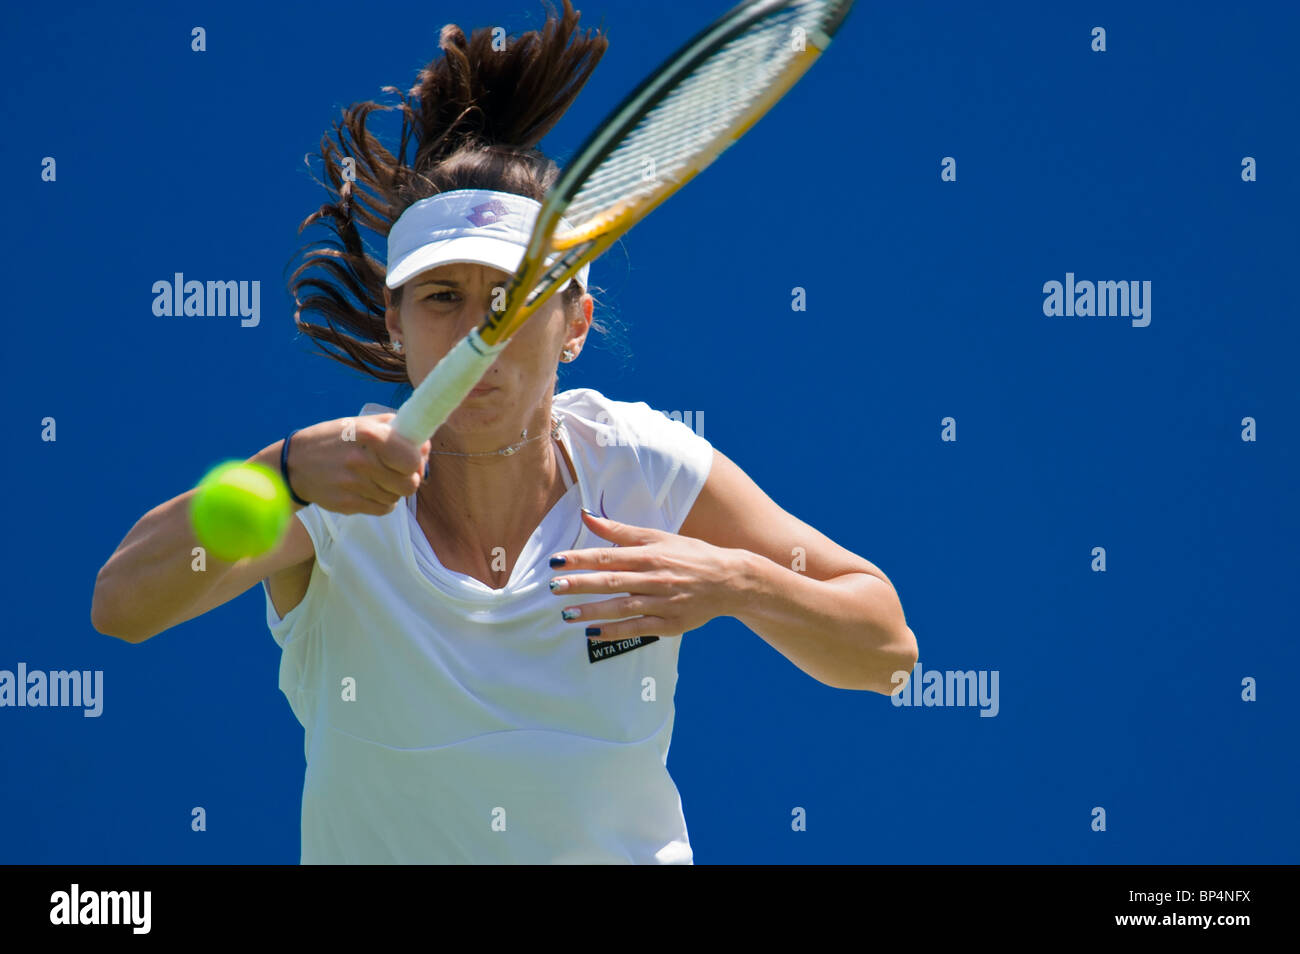 Female tennis player in action hitting forehand. Stock Photo